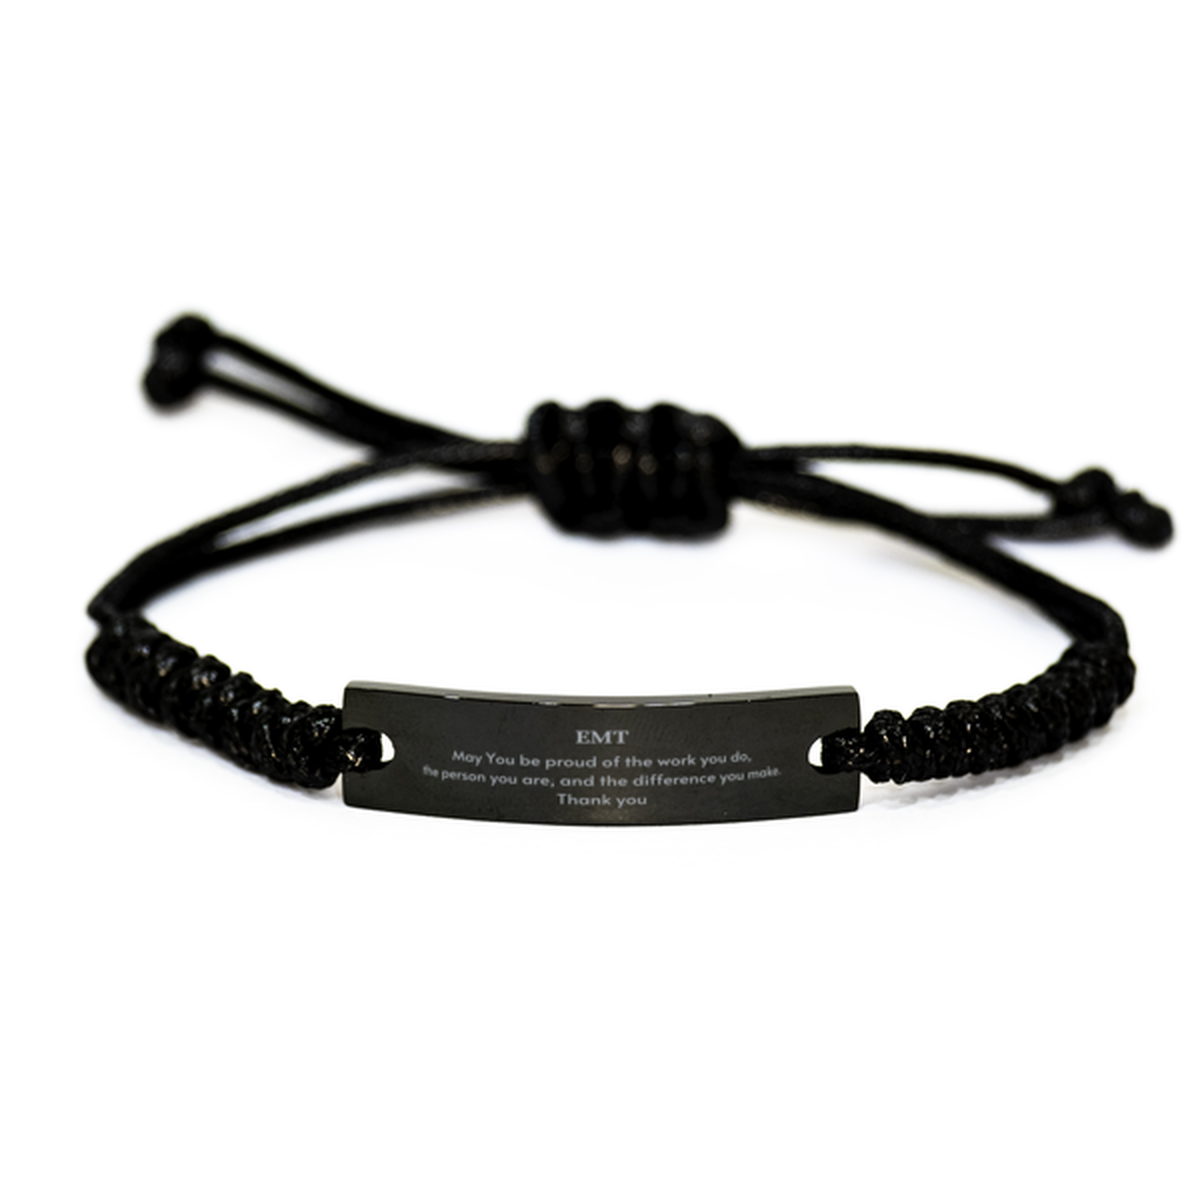 Heartwarming Black Rope Bracelet Retirement Coworkers Gifts for EMT, EMT May You be proud of the work you do, the person you are Gifts for Boss Men Women Friends